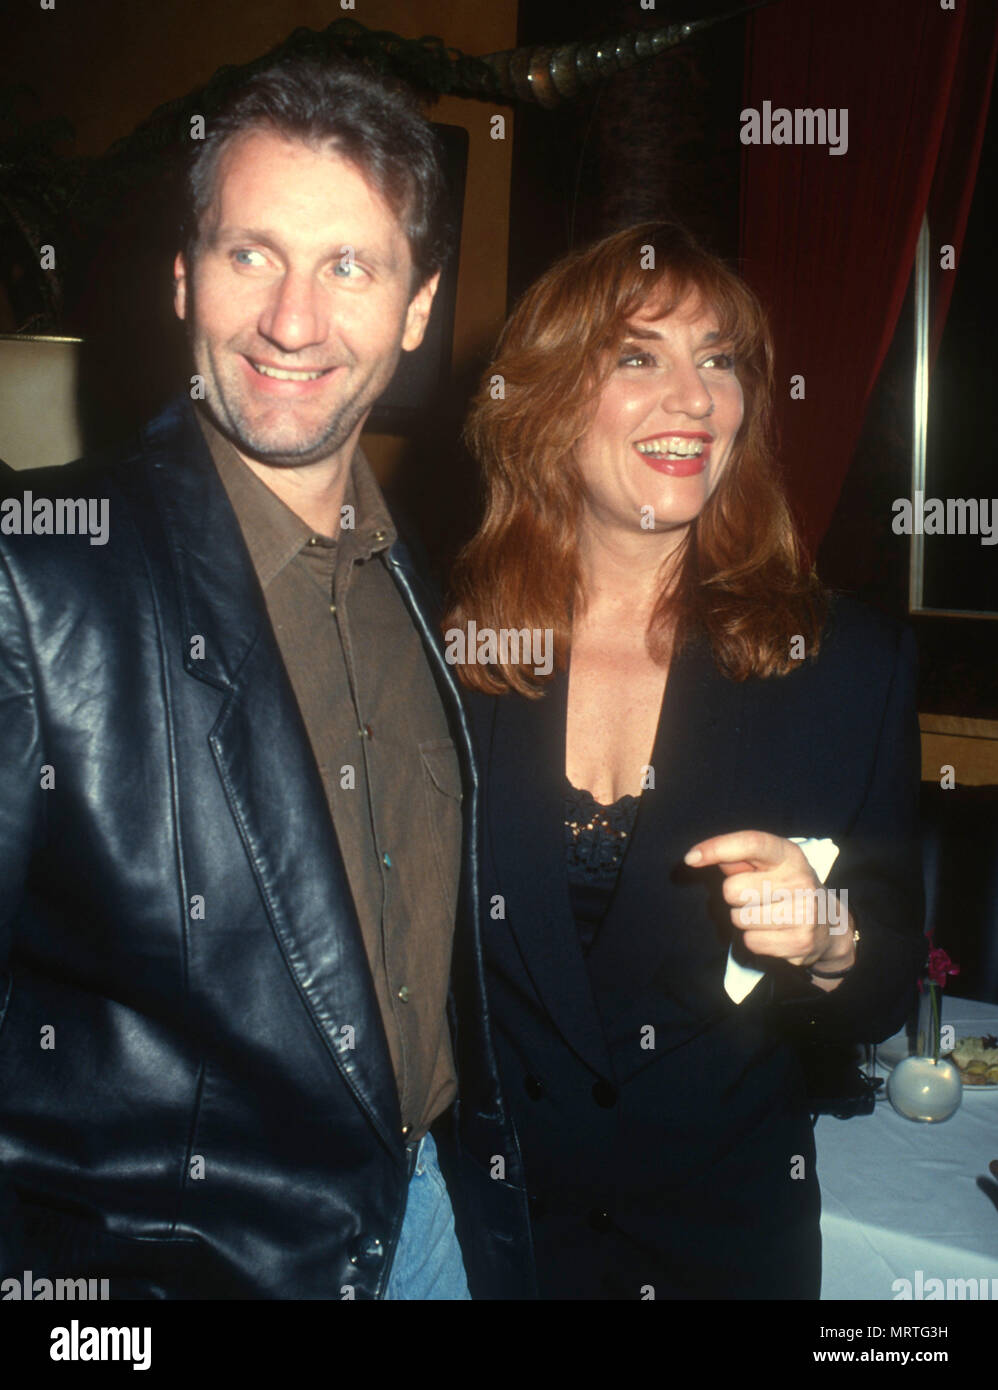 LOS ANGELES, CA - APRIL 15: (L-R) Actor Ed O'Neill and actress Katey Sagal attend 'Married With Children' Event on April 15, 1991 in Los Angeles, California. Photo by Barry King/Alamy Stock Photo Stock Photo